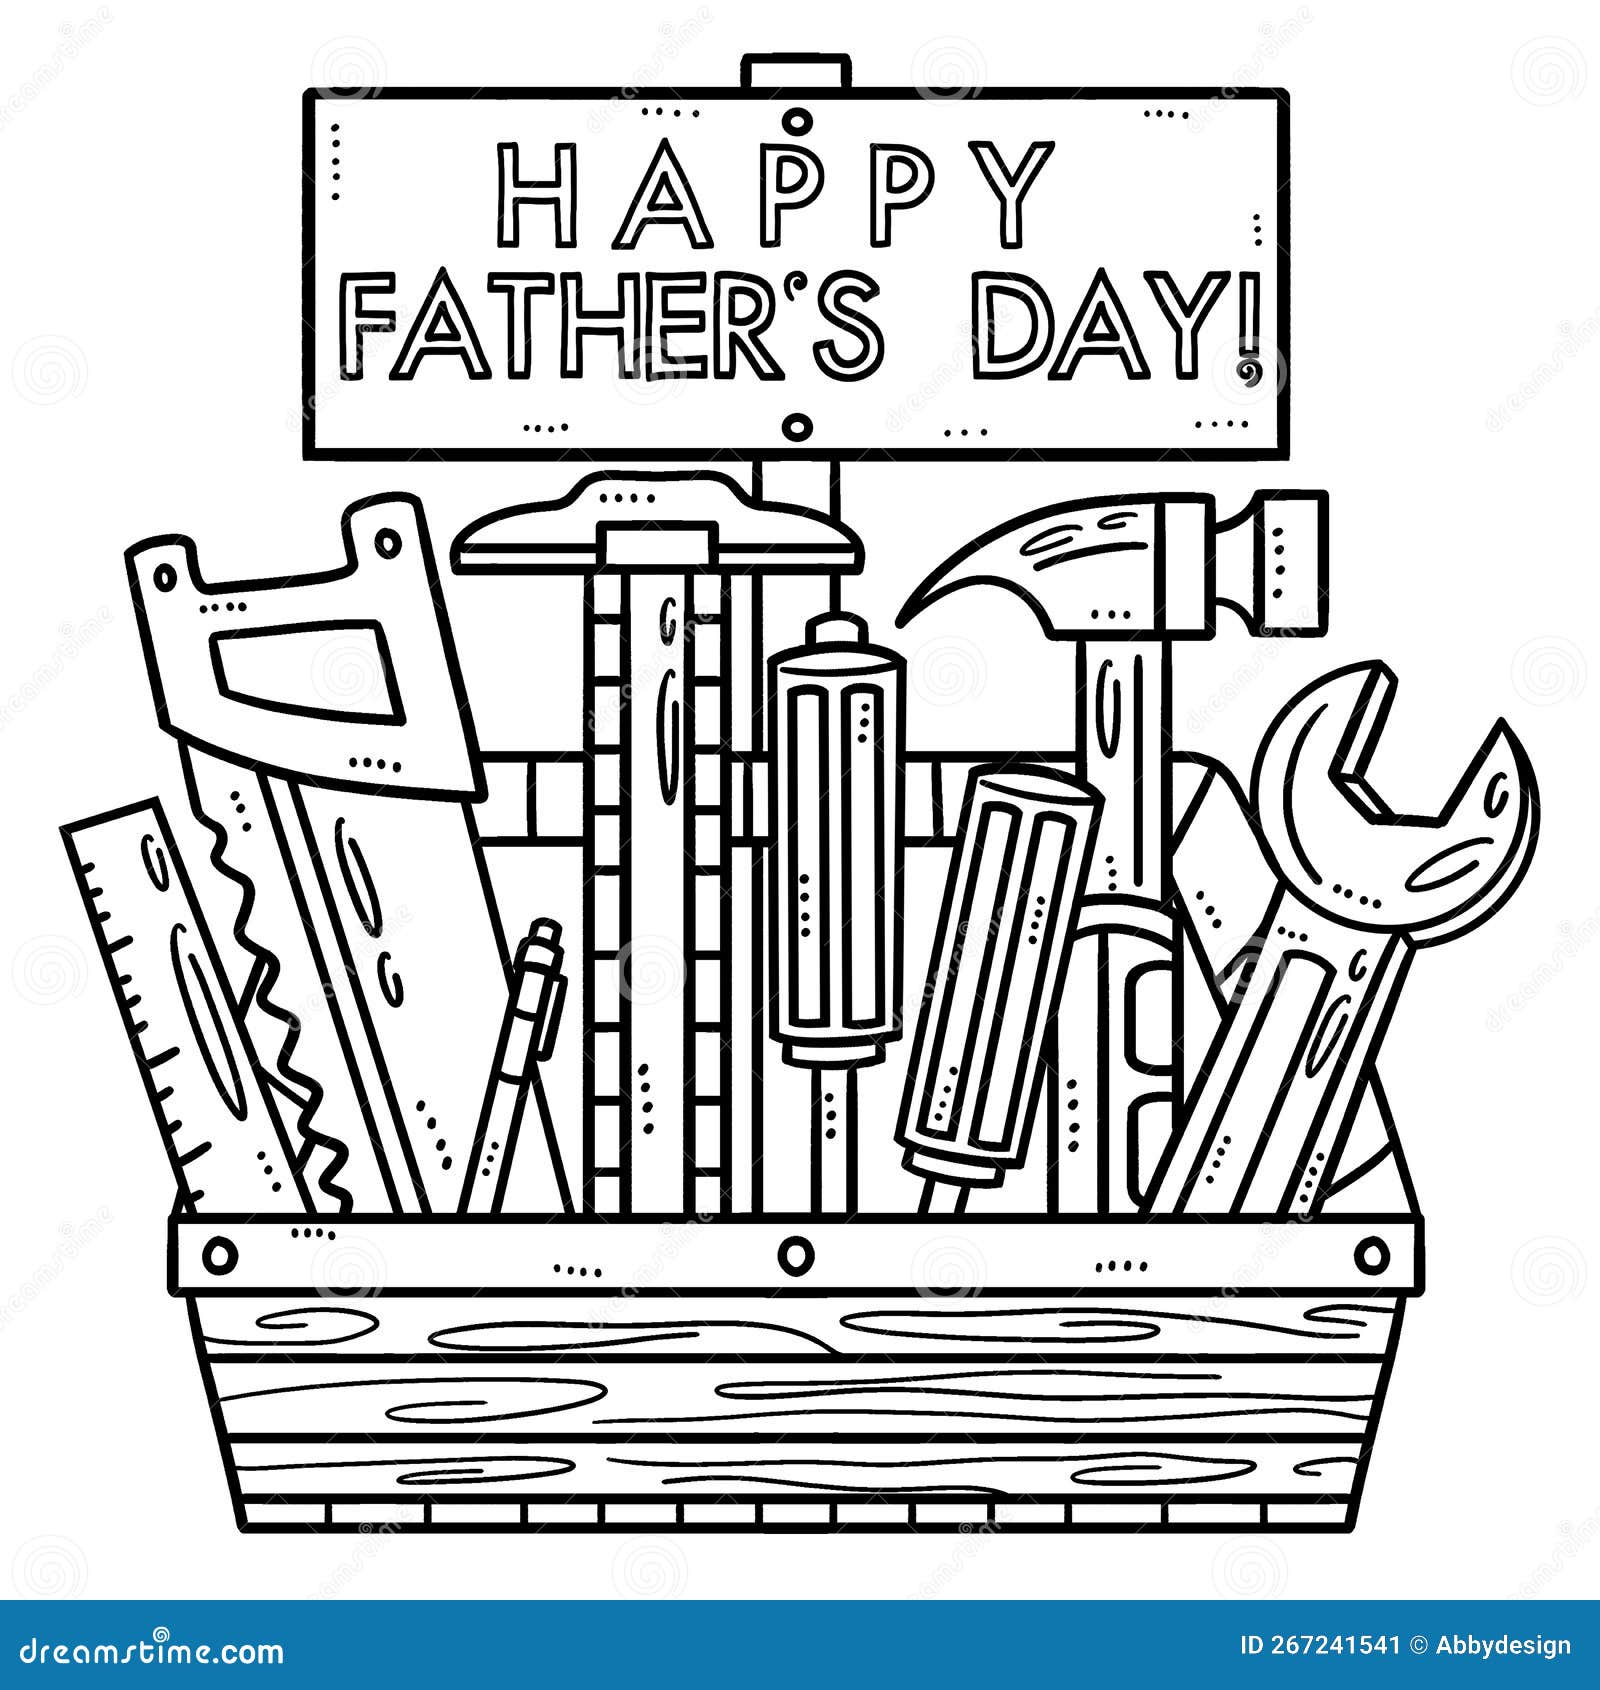 Easy to Learn Father's Day Drawing Video Tutorial For All - Kids Art & Craft